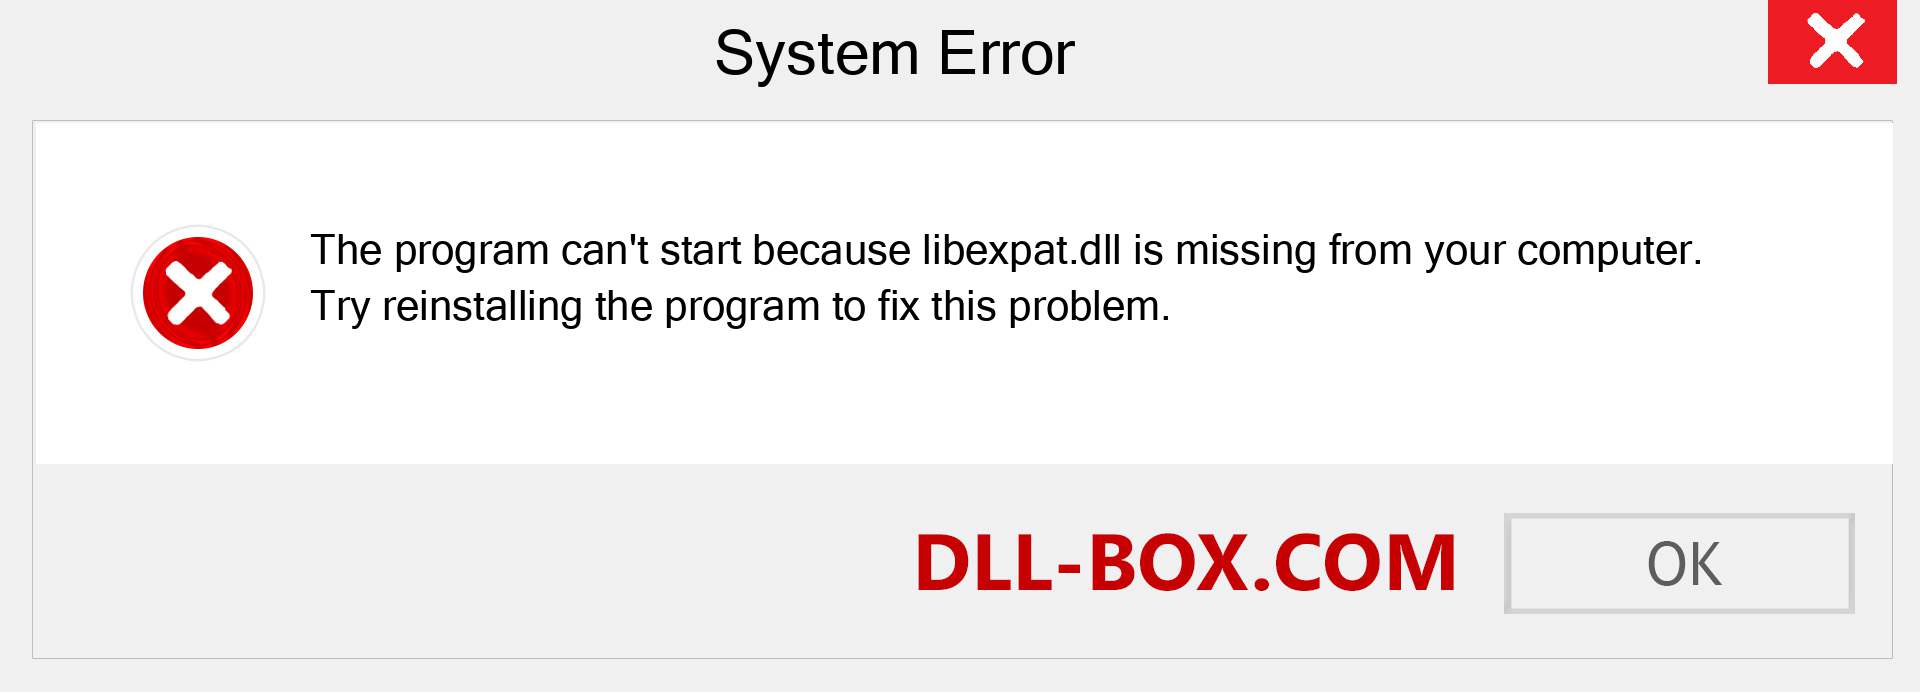  libexpat.dll file is missing?. Download for Windows 7, 8, 10 - Fix  libexpat dll Missing Error on Windows, photos, images